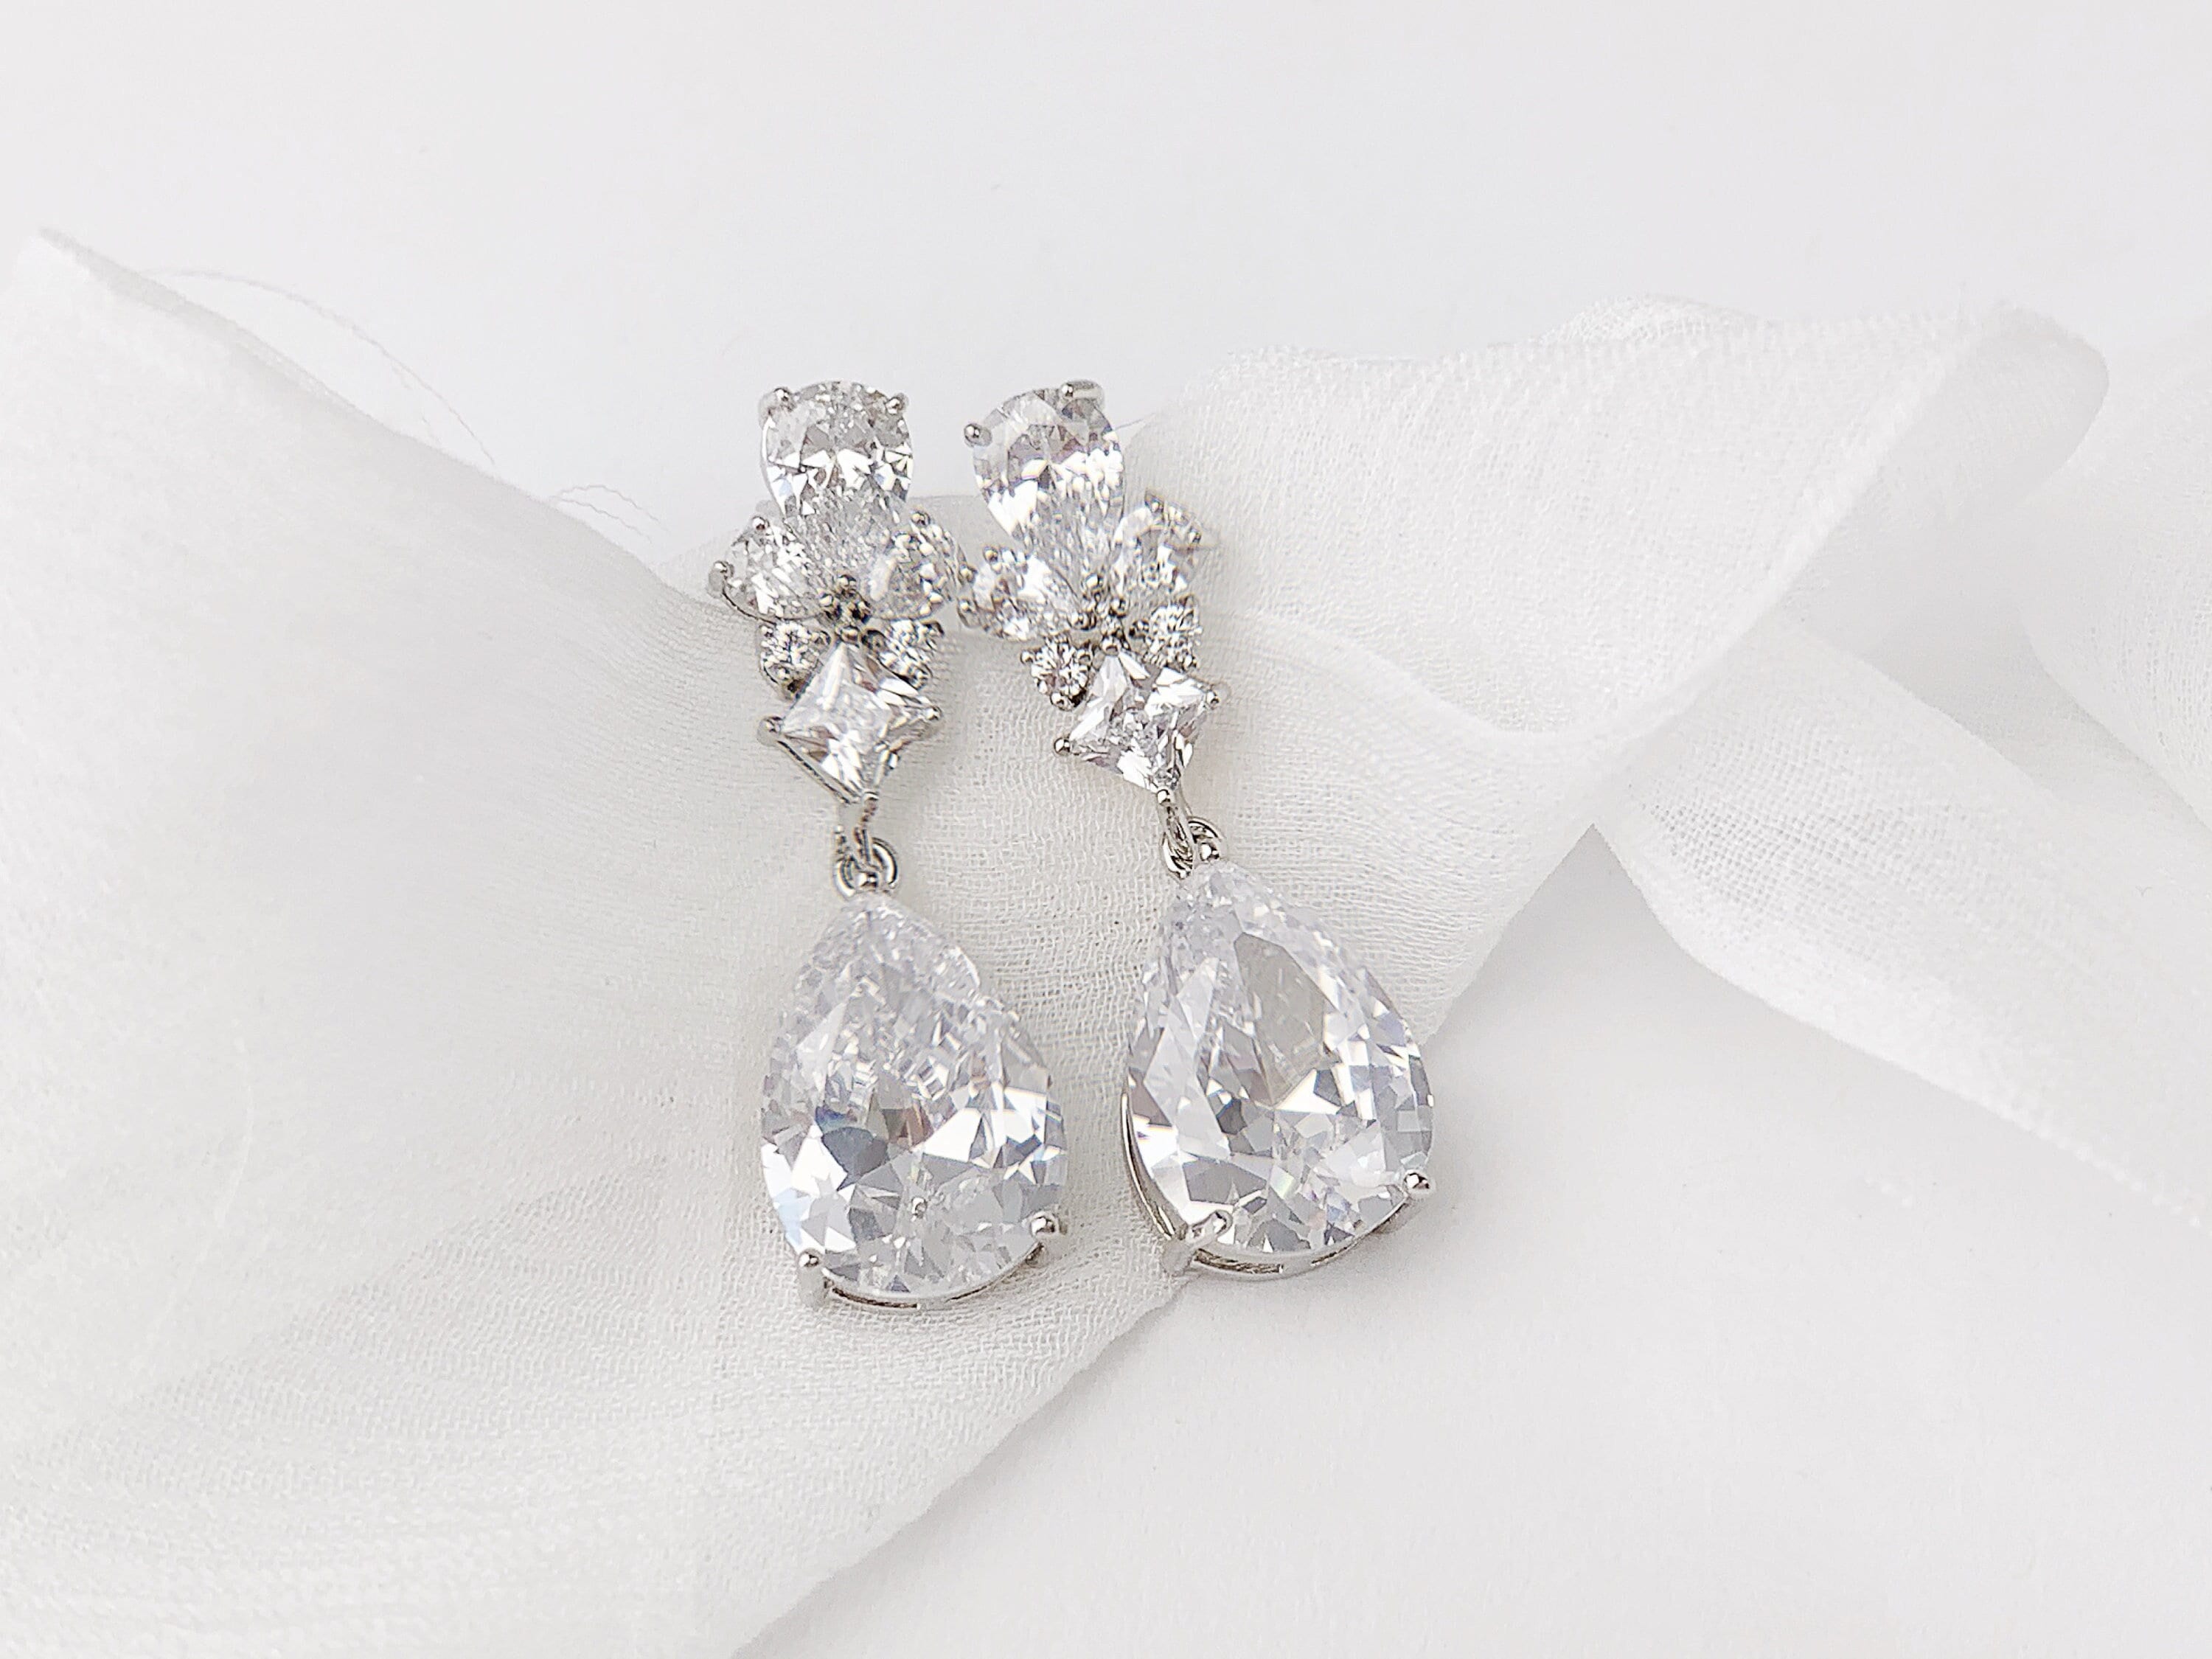 Top-Selling Wholesale Bridal Clip Earrings with CZ Pear Drops - Mariell  Bridal Jewelry & Wedding Accessories